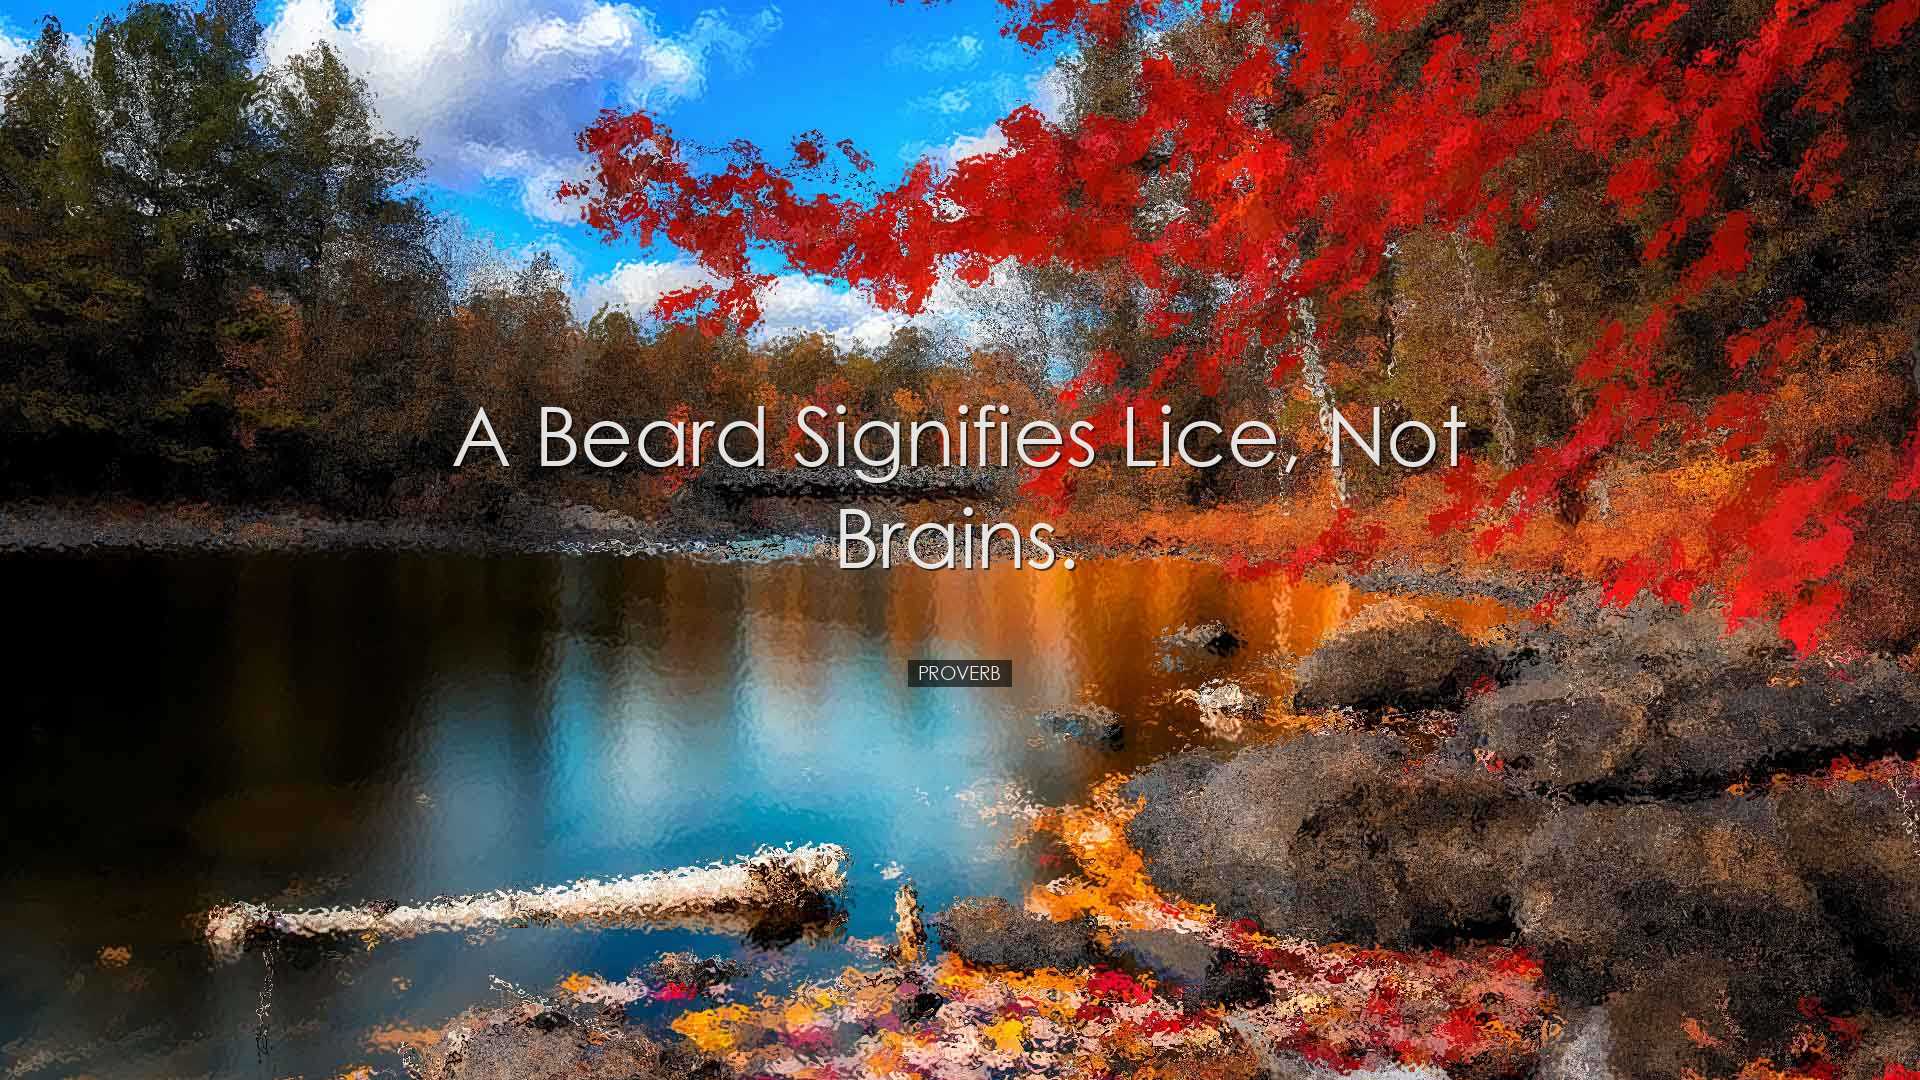 A beard signifies lice, not brains. - Proverb